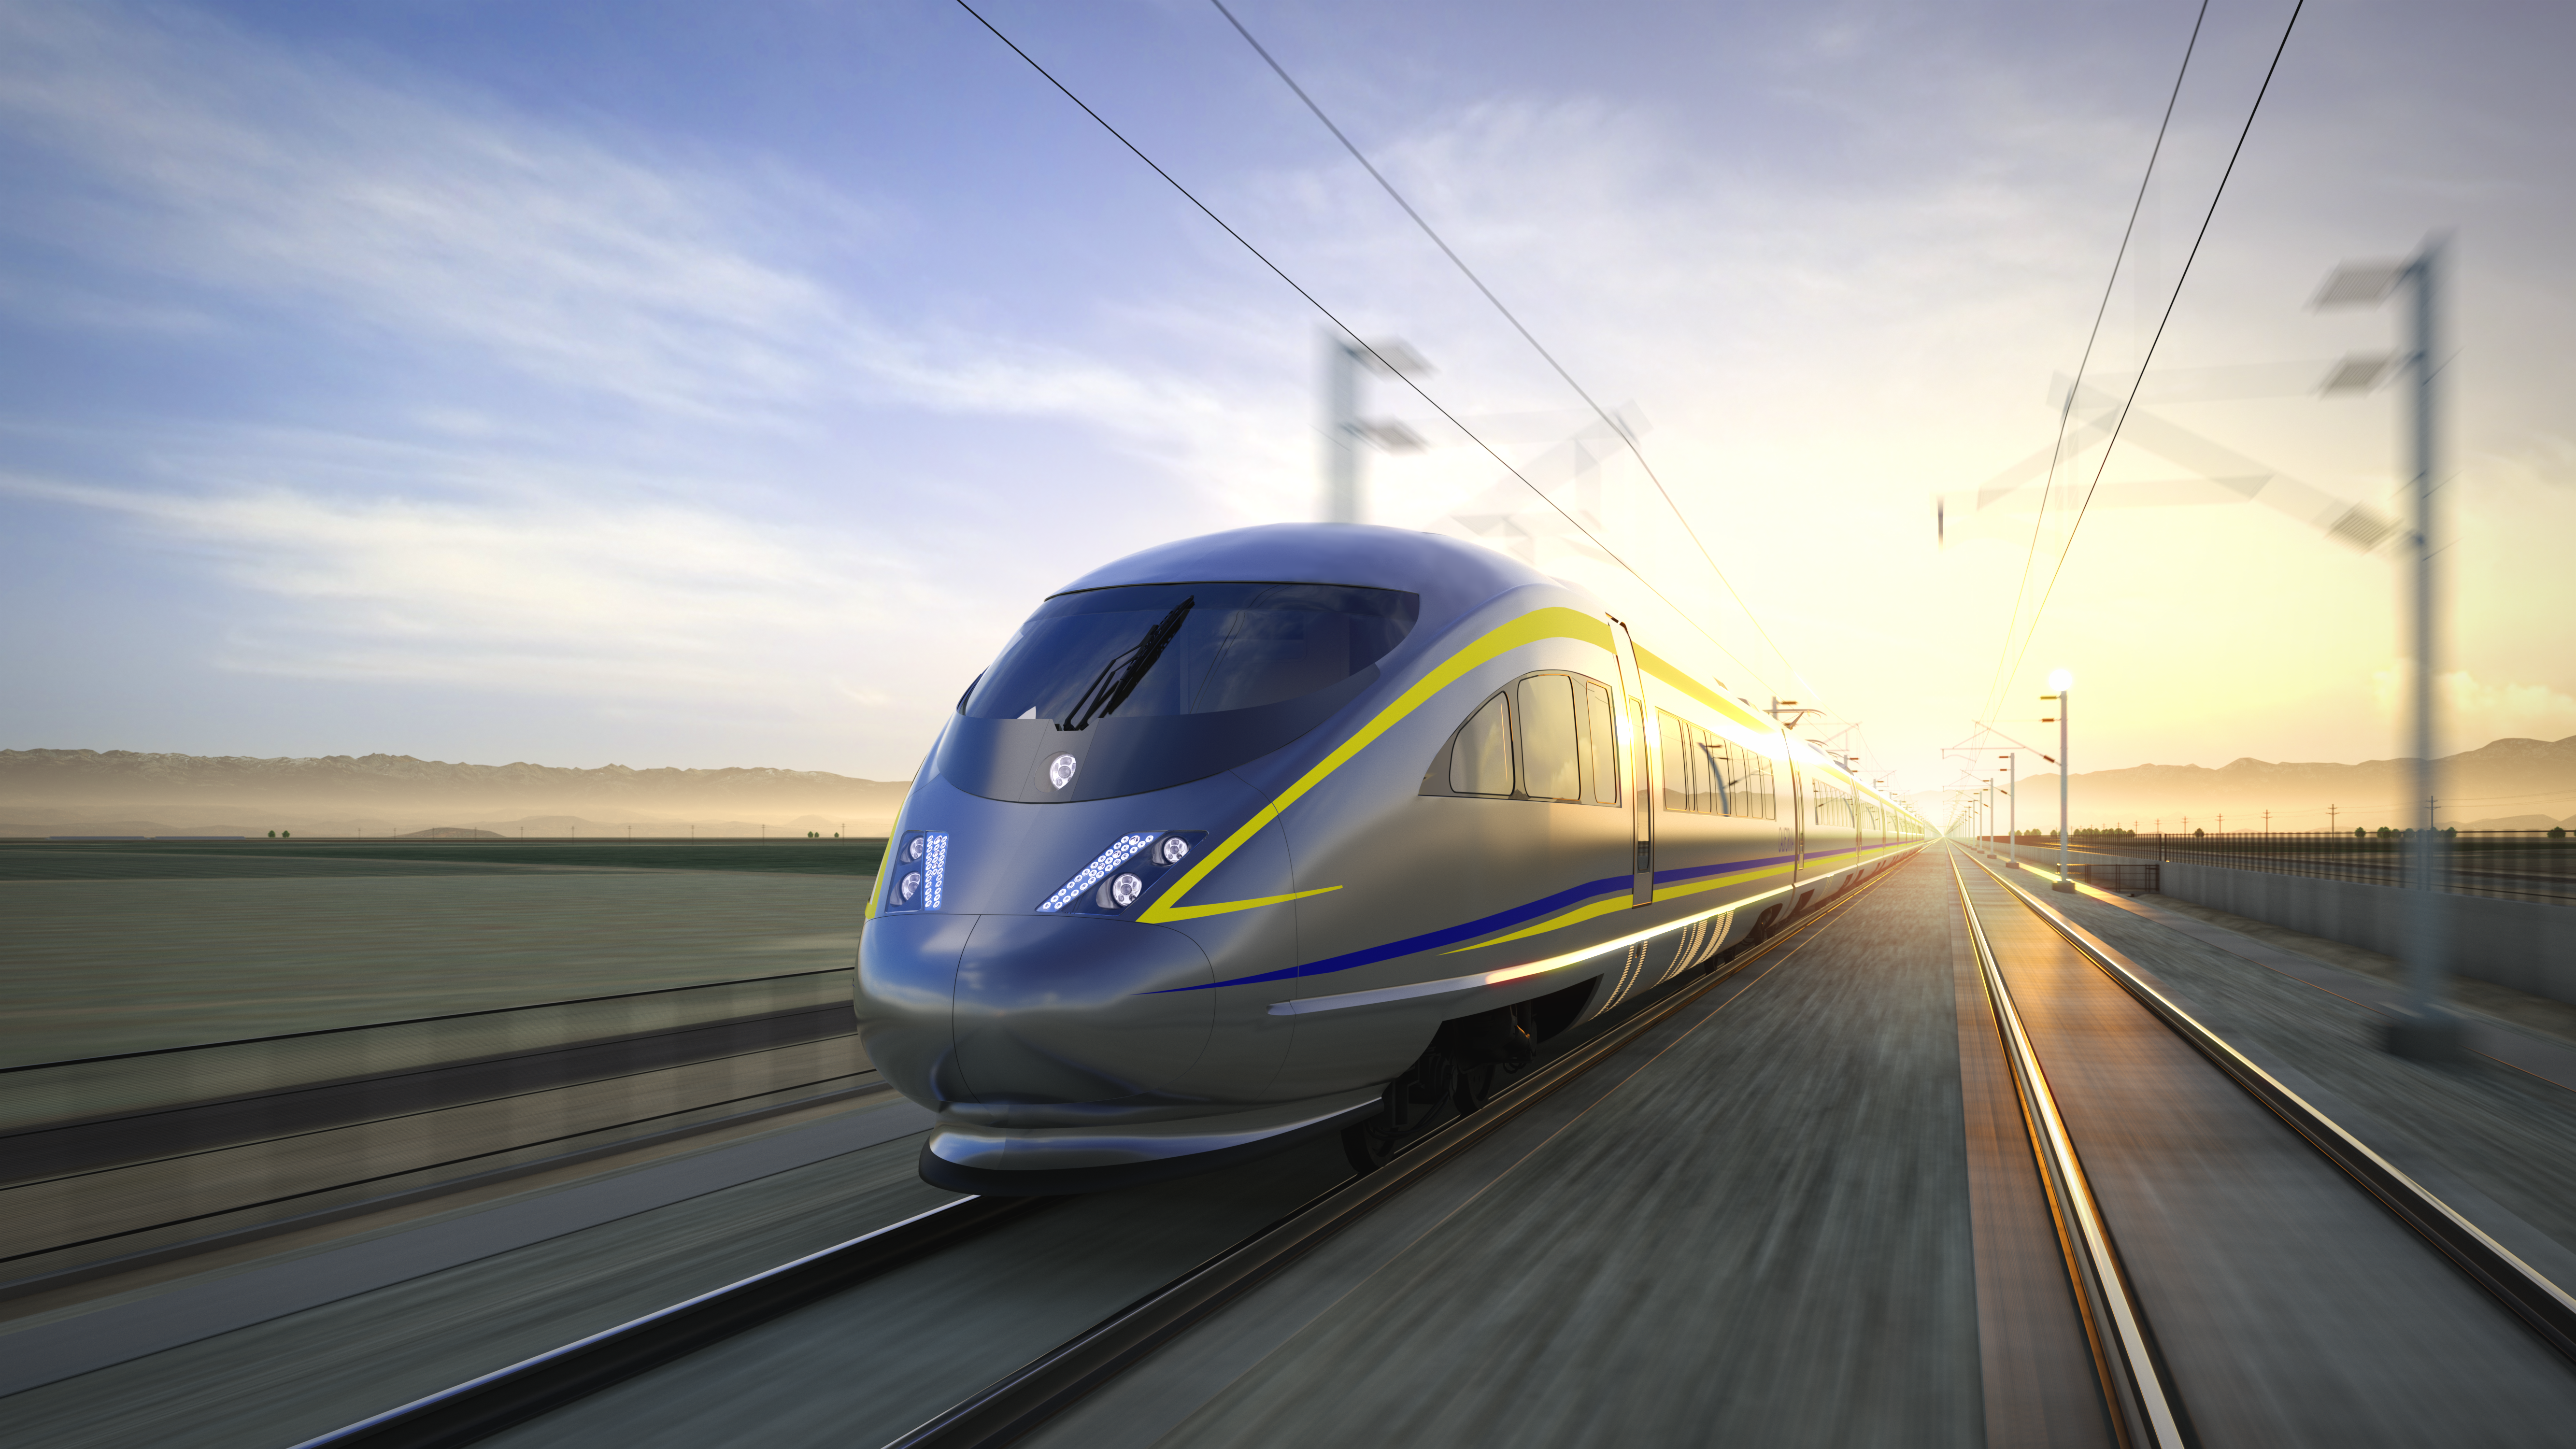 AECOM JV to Provide Programme Management Support for California High-Speed Rail